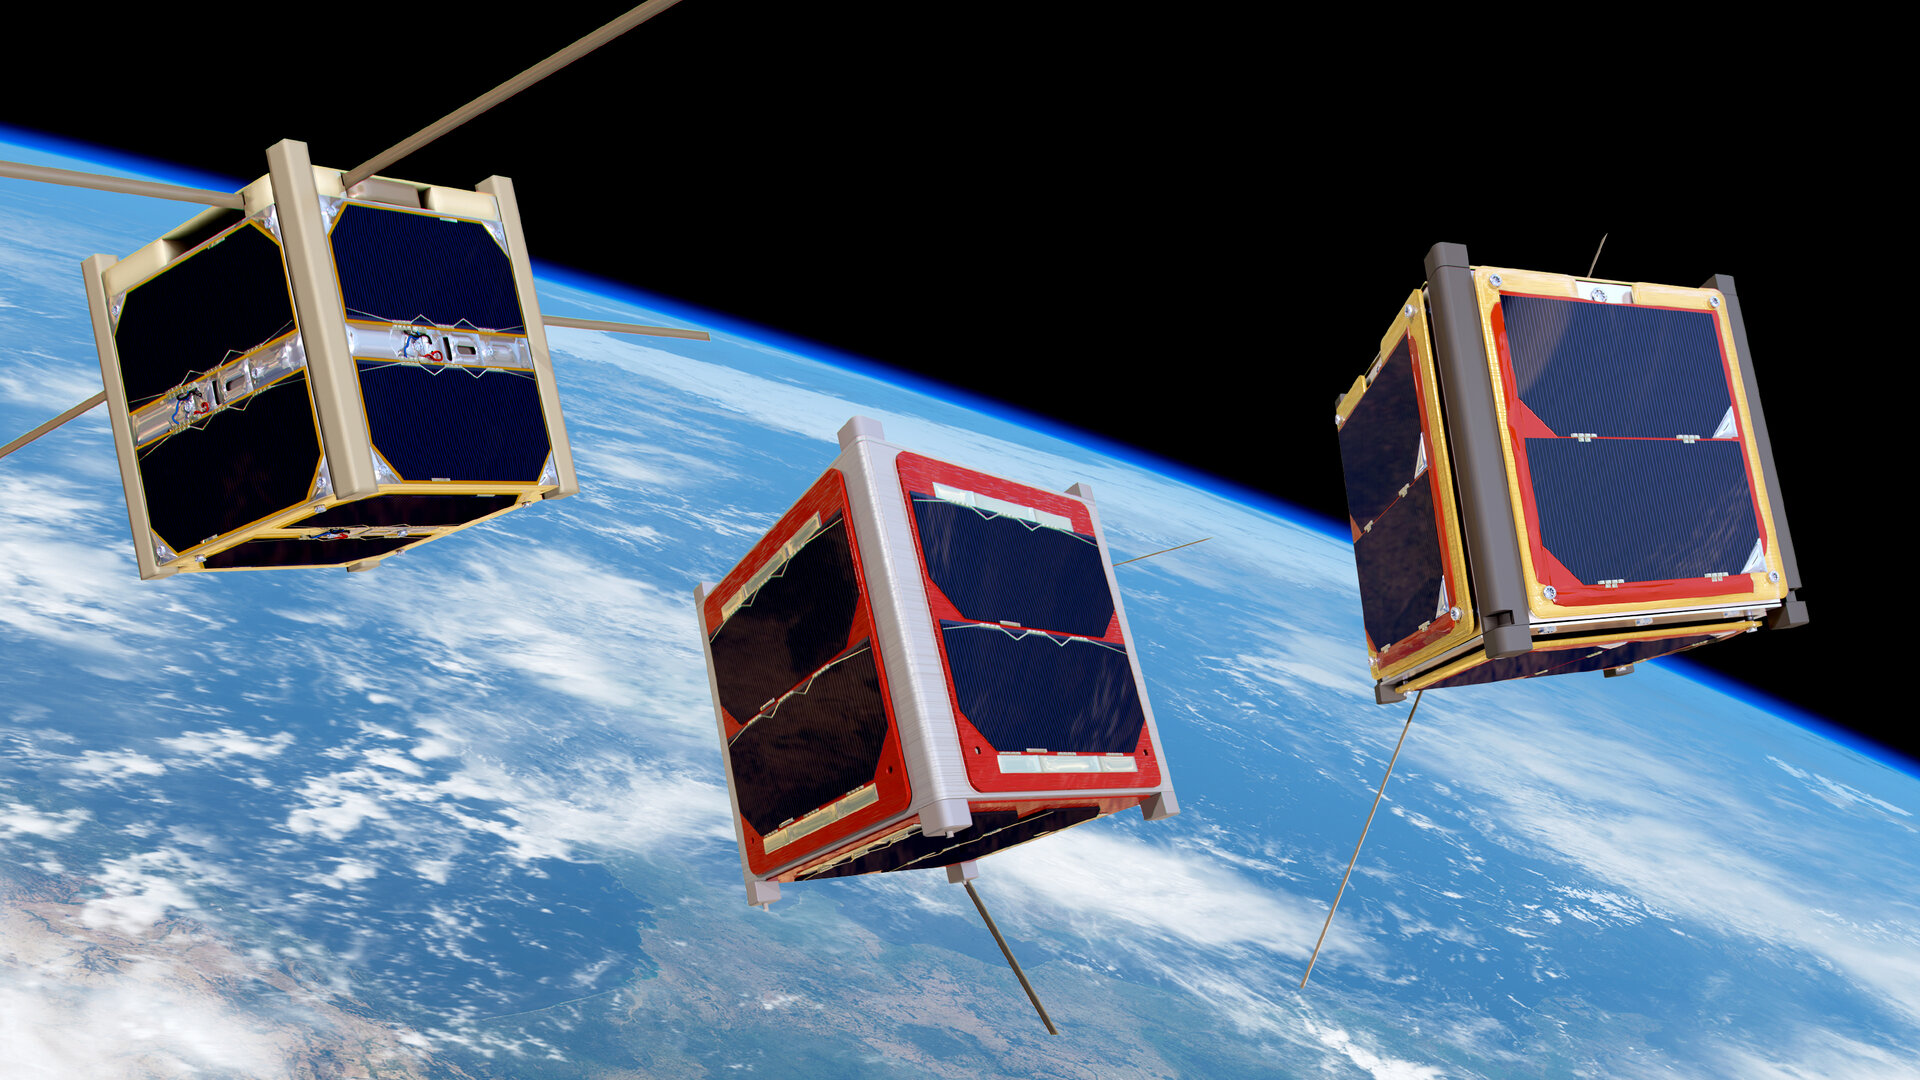 The European Space Agency. (2022, March). CubeSats orbiting Earth. Retrieved from https://www.esa.int/var/esa/storage/images/esa_multimedia/images/2016/04/cubesats_orbiting_earth/15950521-1-eng-GB/CubeSats_orbiting_Earth_pillars.jpg